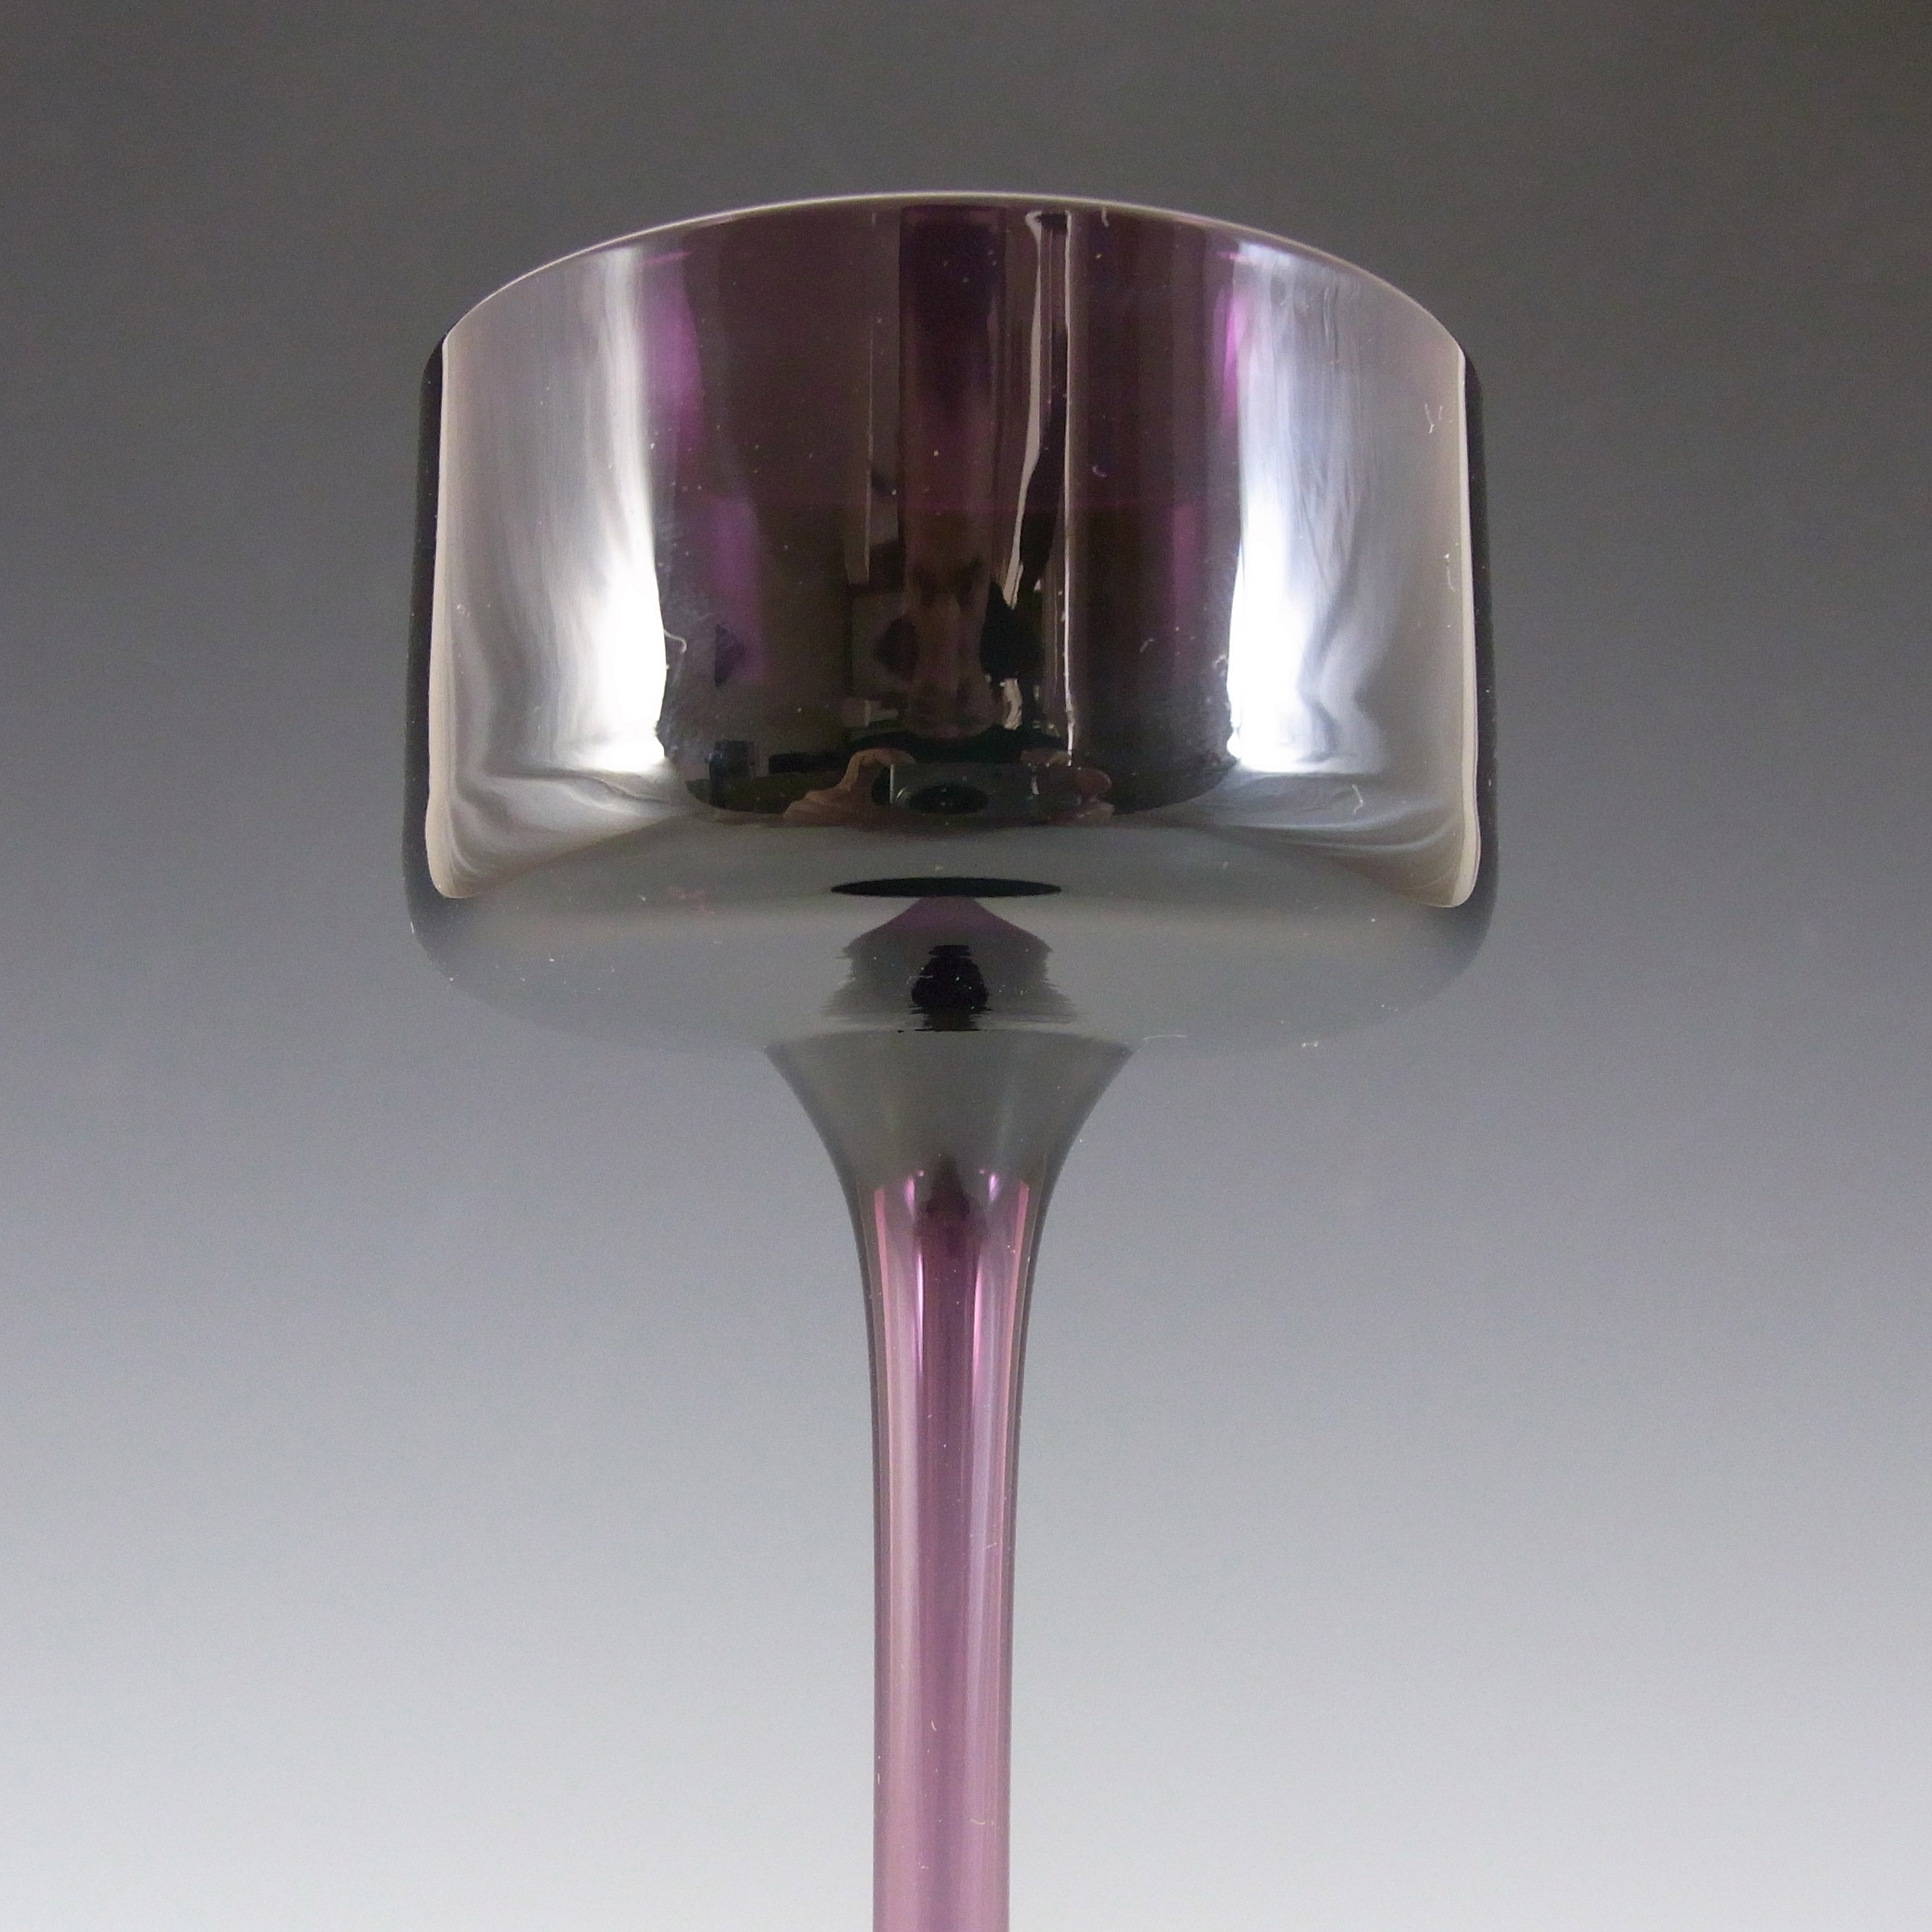 Wedgwood "Brancaster" Amethyst Glass 8" Candlestick RSW15/2 - Click Image to Close